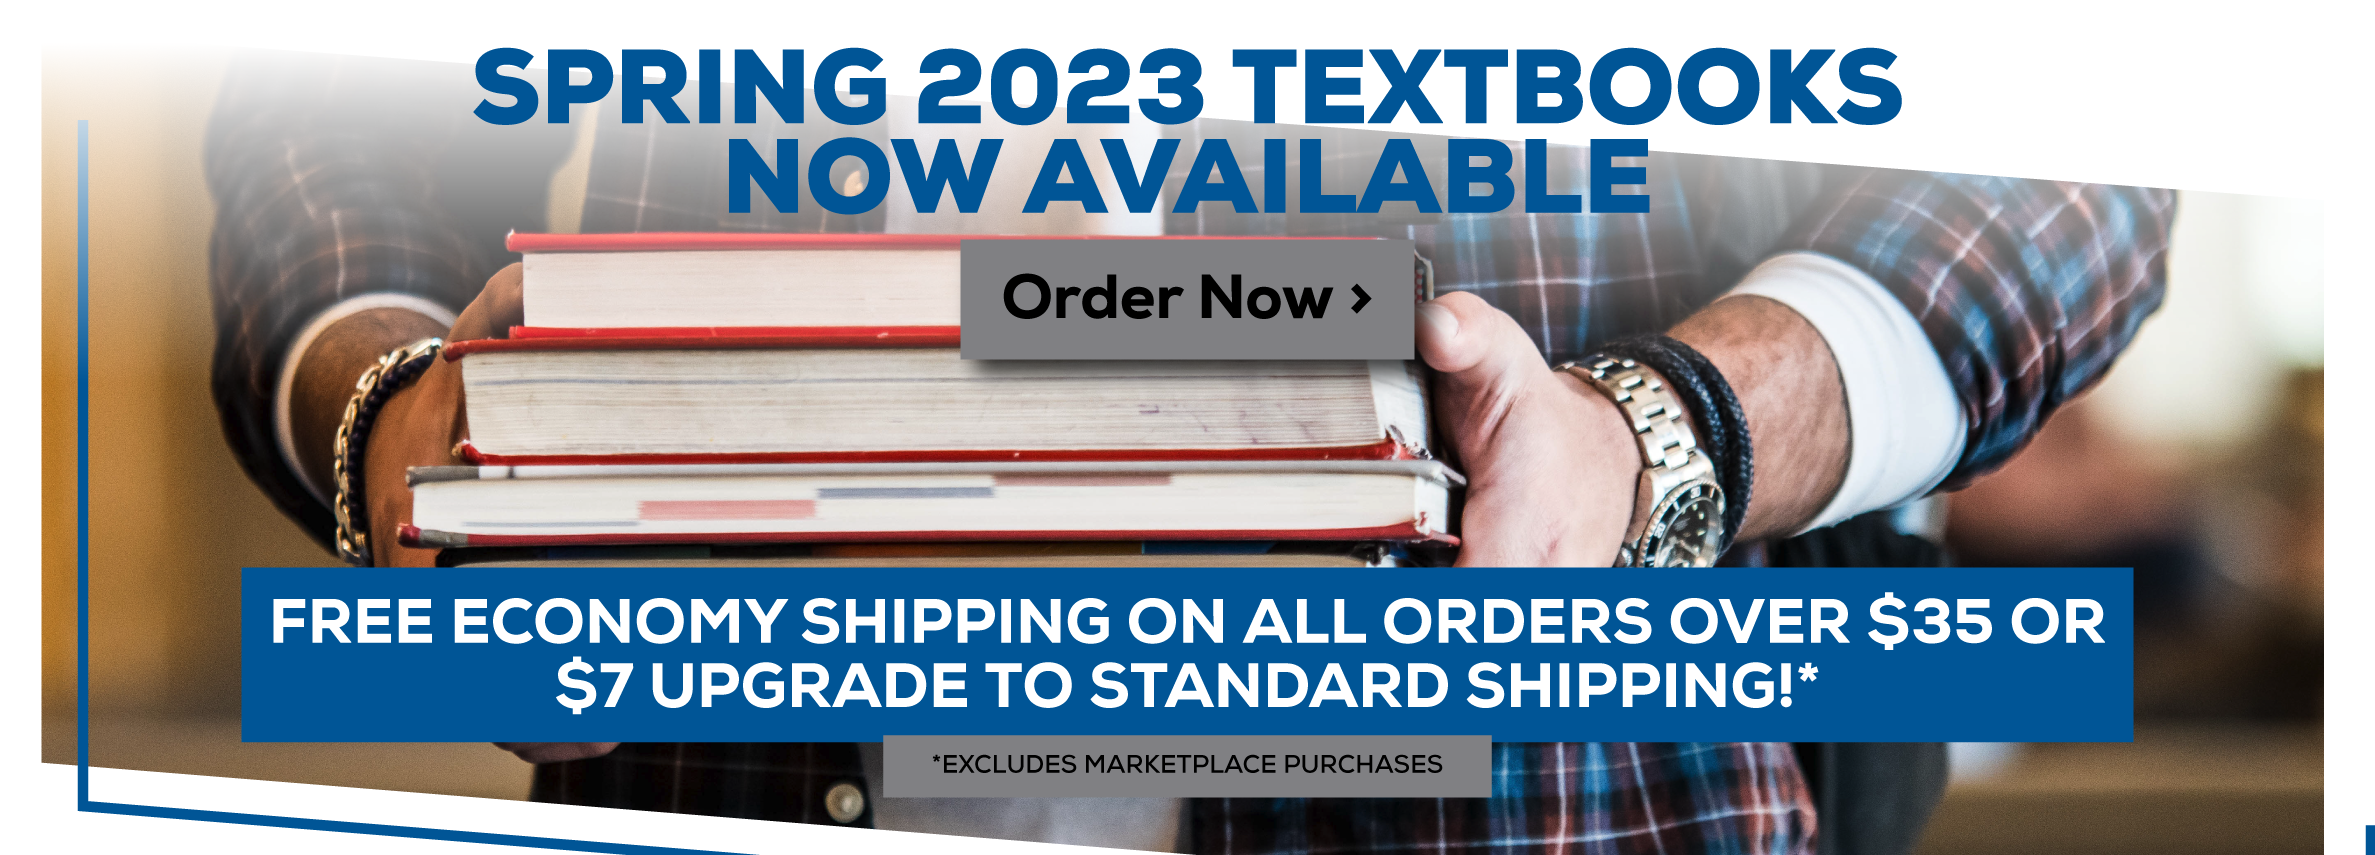 Spring 2023 Textbooks Now Available. Order Now. Free economy shipping on all orders over $35 or $7 upgrade to standard shipping* *Excludes marketplace purchases